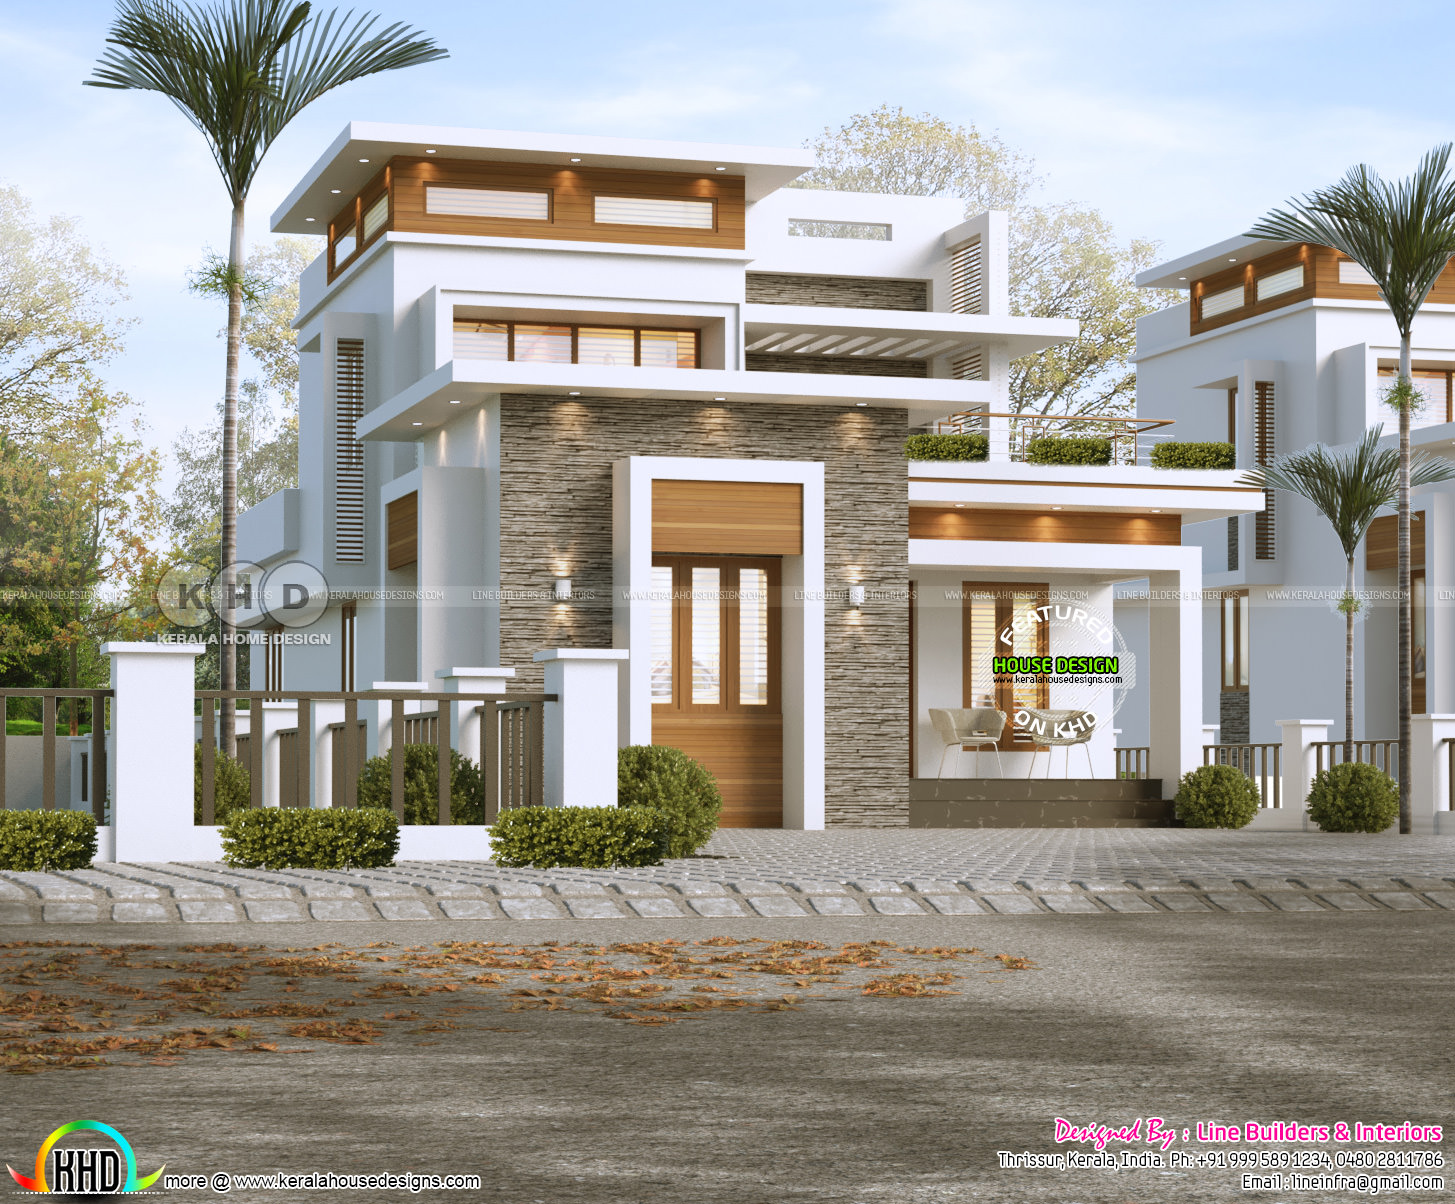 1568 Square Feet 2 Bhk Flat Roof Modern House Kerala Home Design And Floor Plans 8000 Houses